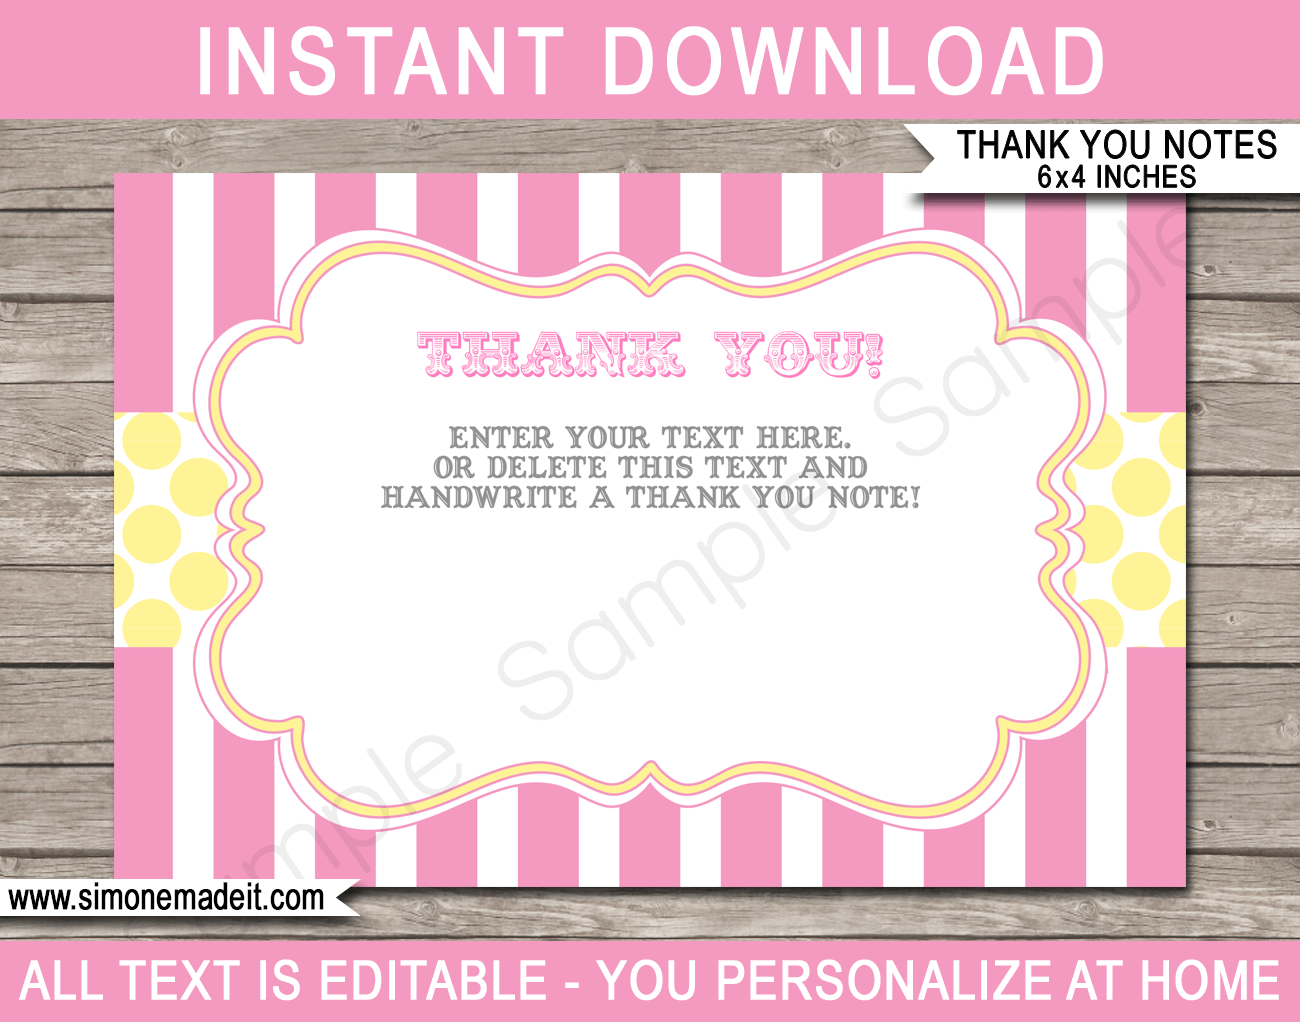 Printable Carnival Thank You Cards - Favor Tags - Circus or Carnival Birthday Party theme - Editable Template - Instant Download via simonemadeit.com